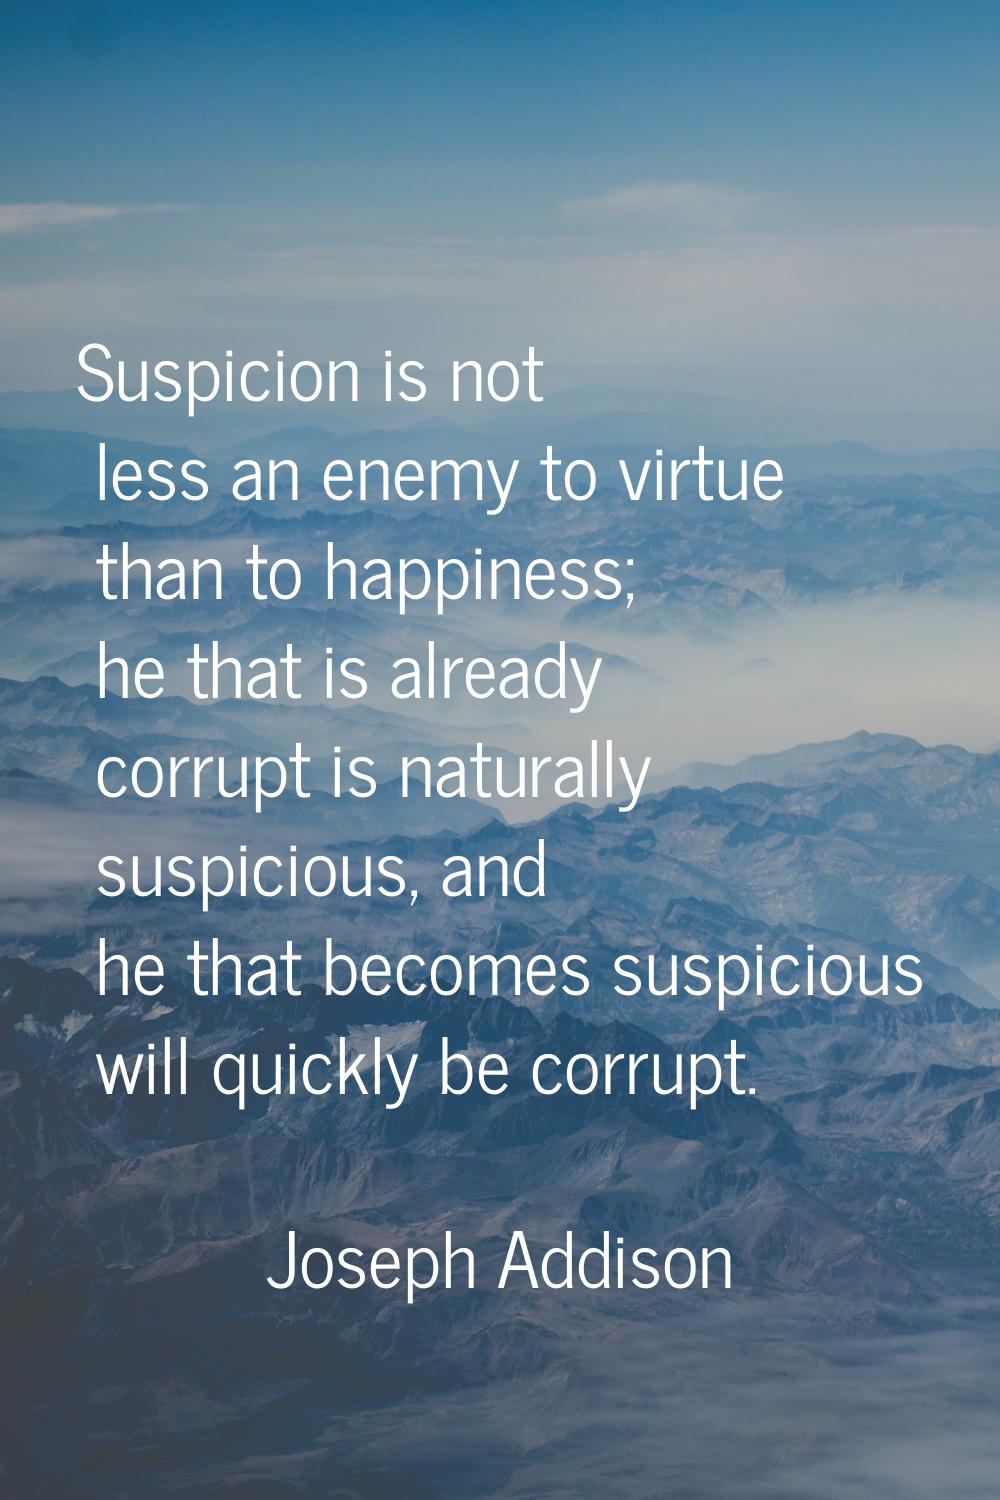 Suspicion is not less an enemy to virtue than to happiness; he that is already corrupt is naturally